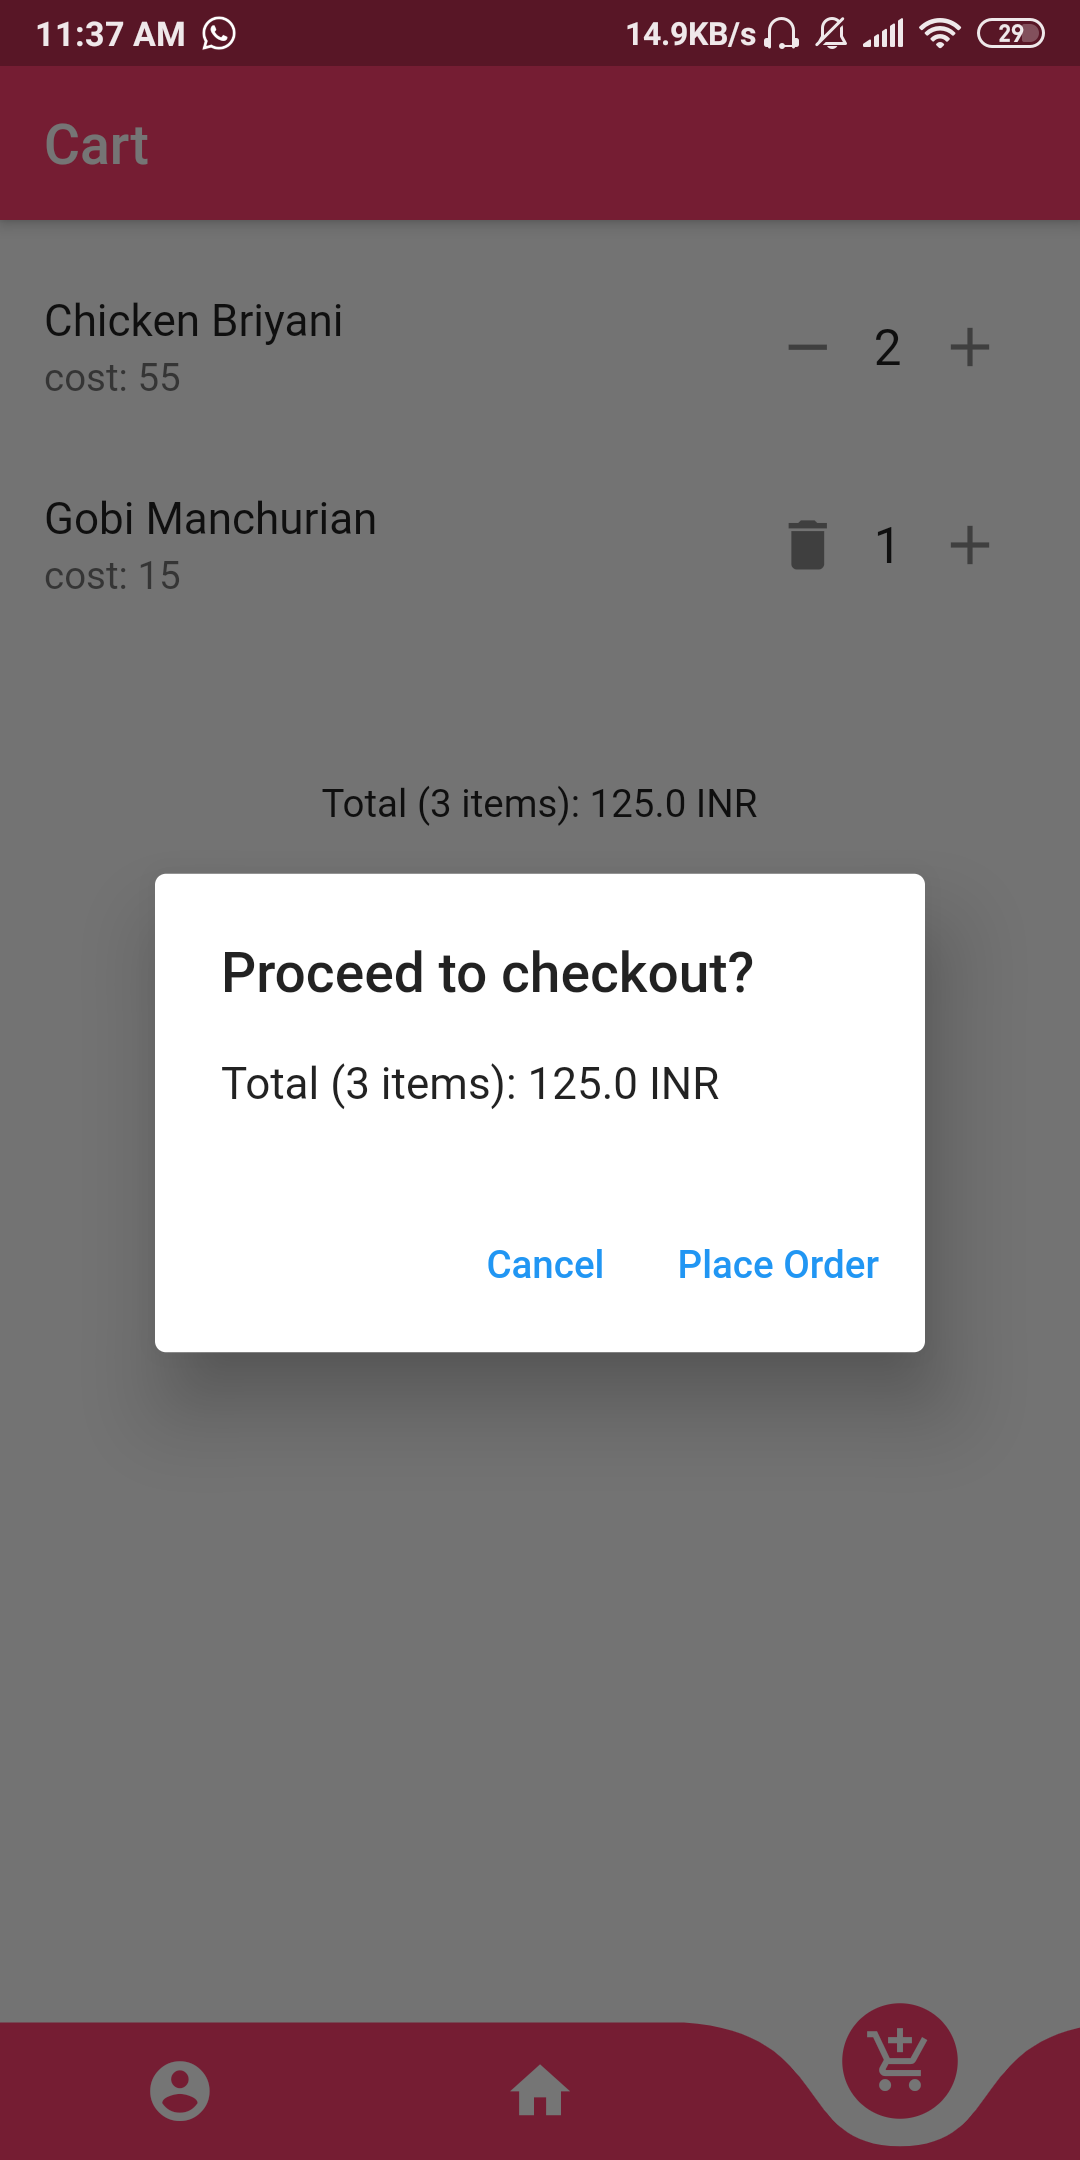 confirm order image